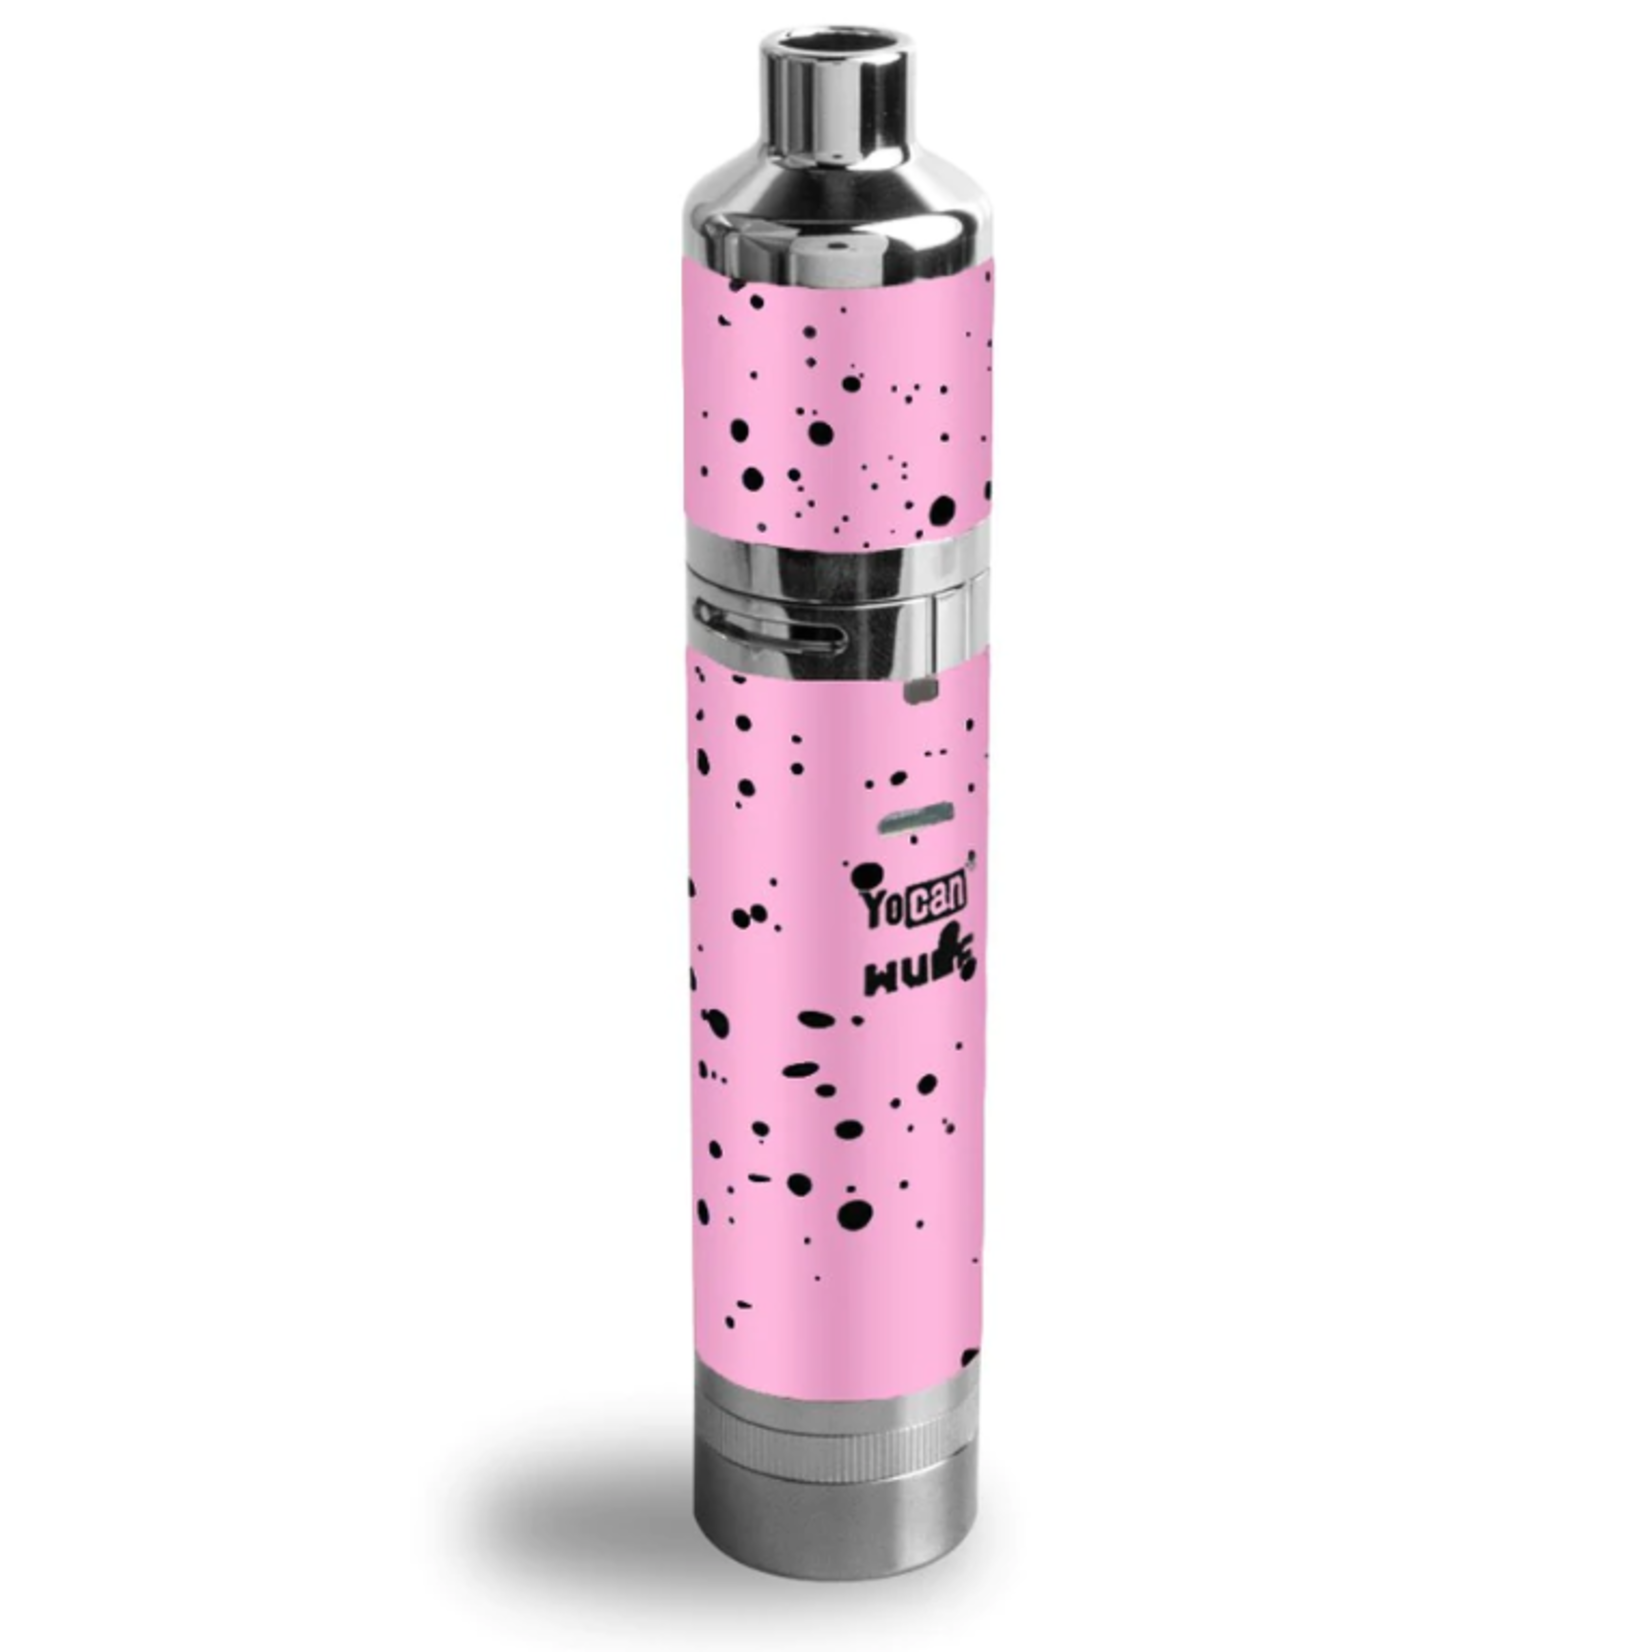 Yocan Yocan Evolve Plus XL (Wulf SE) Herbal Concentrate Vaporizer - Pink w/ Black Spatter